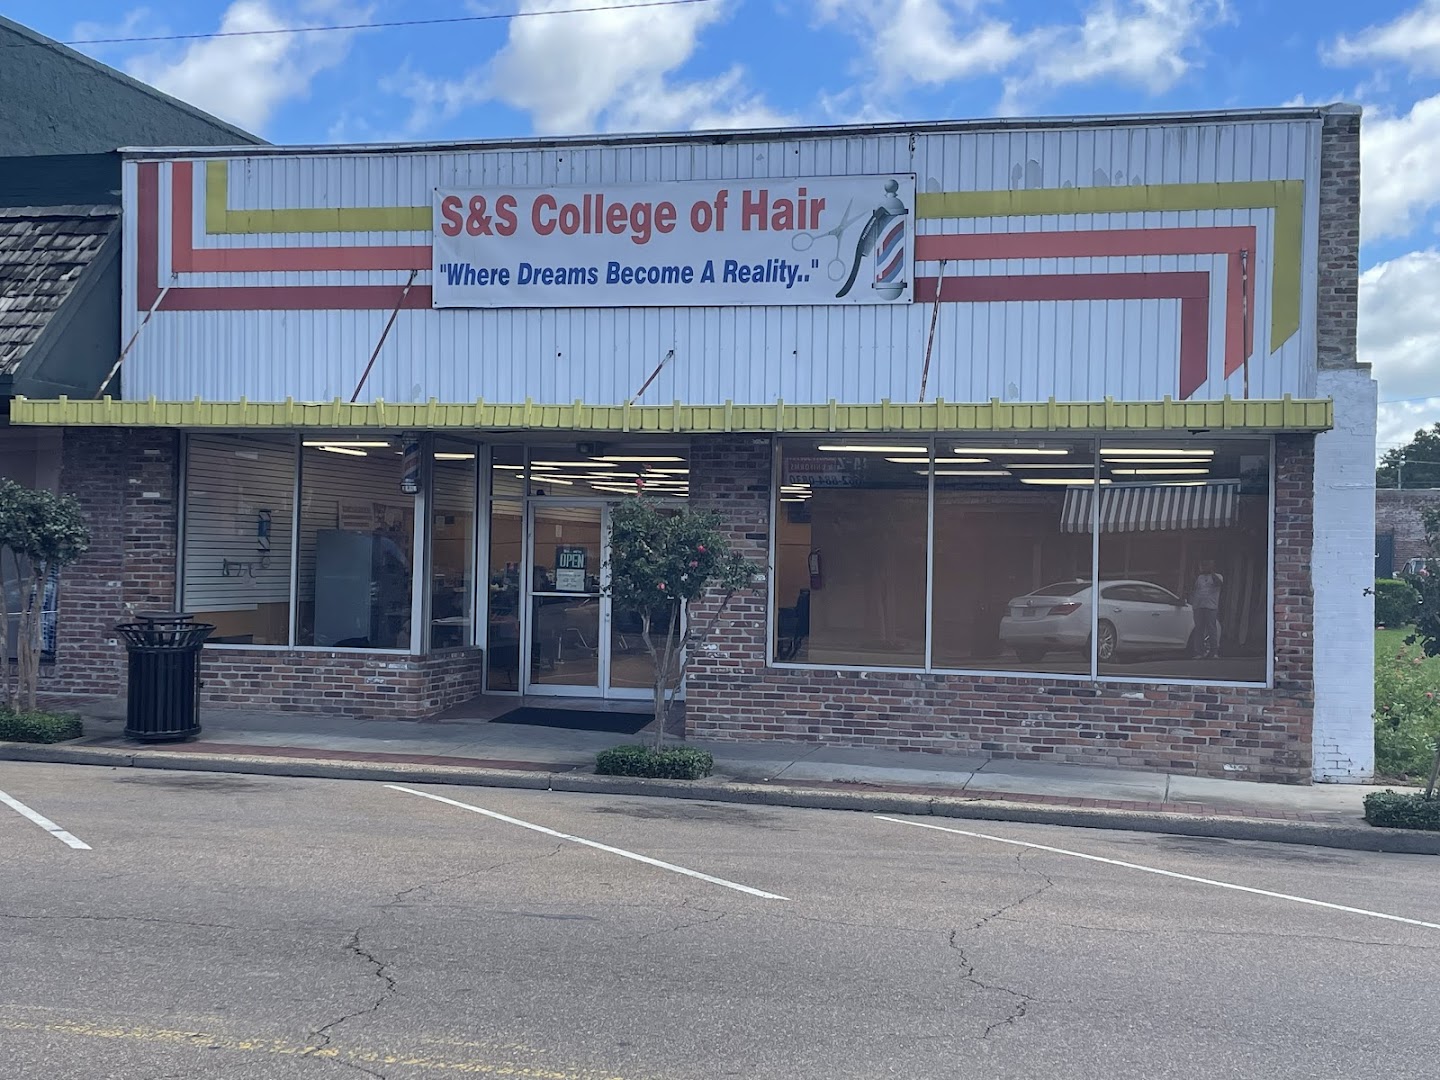 S&S College of Hair